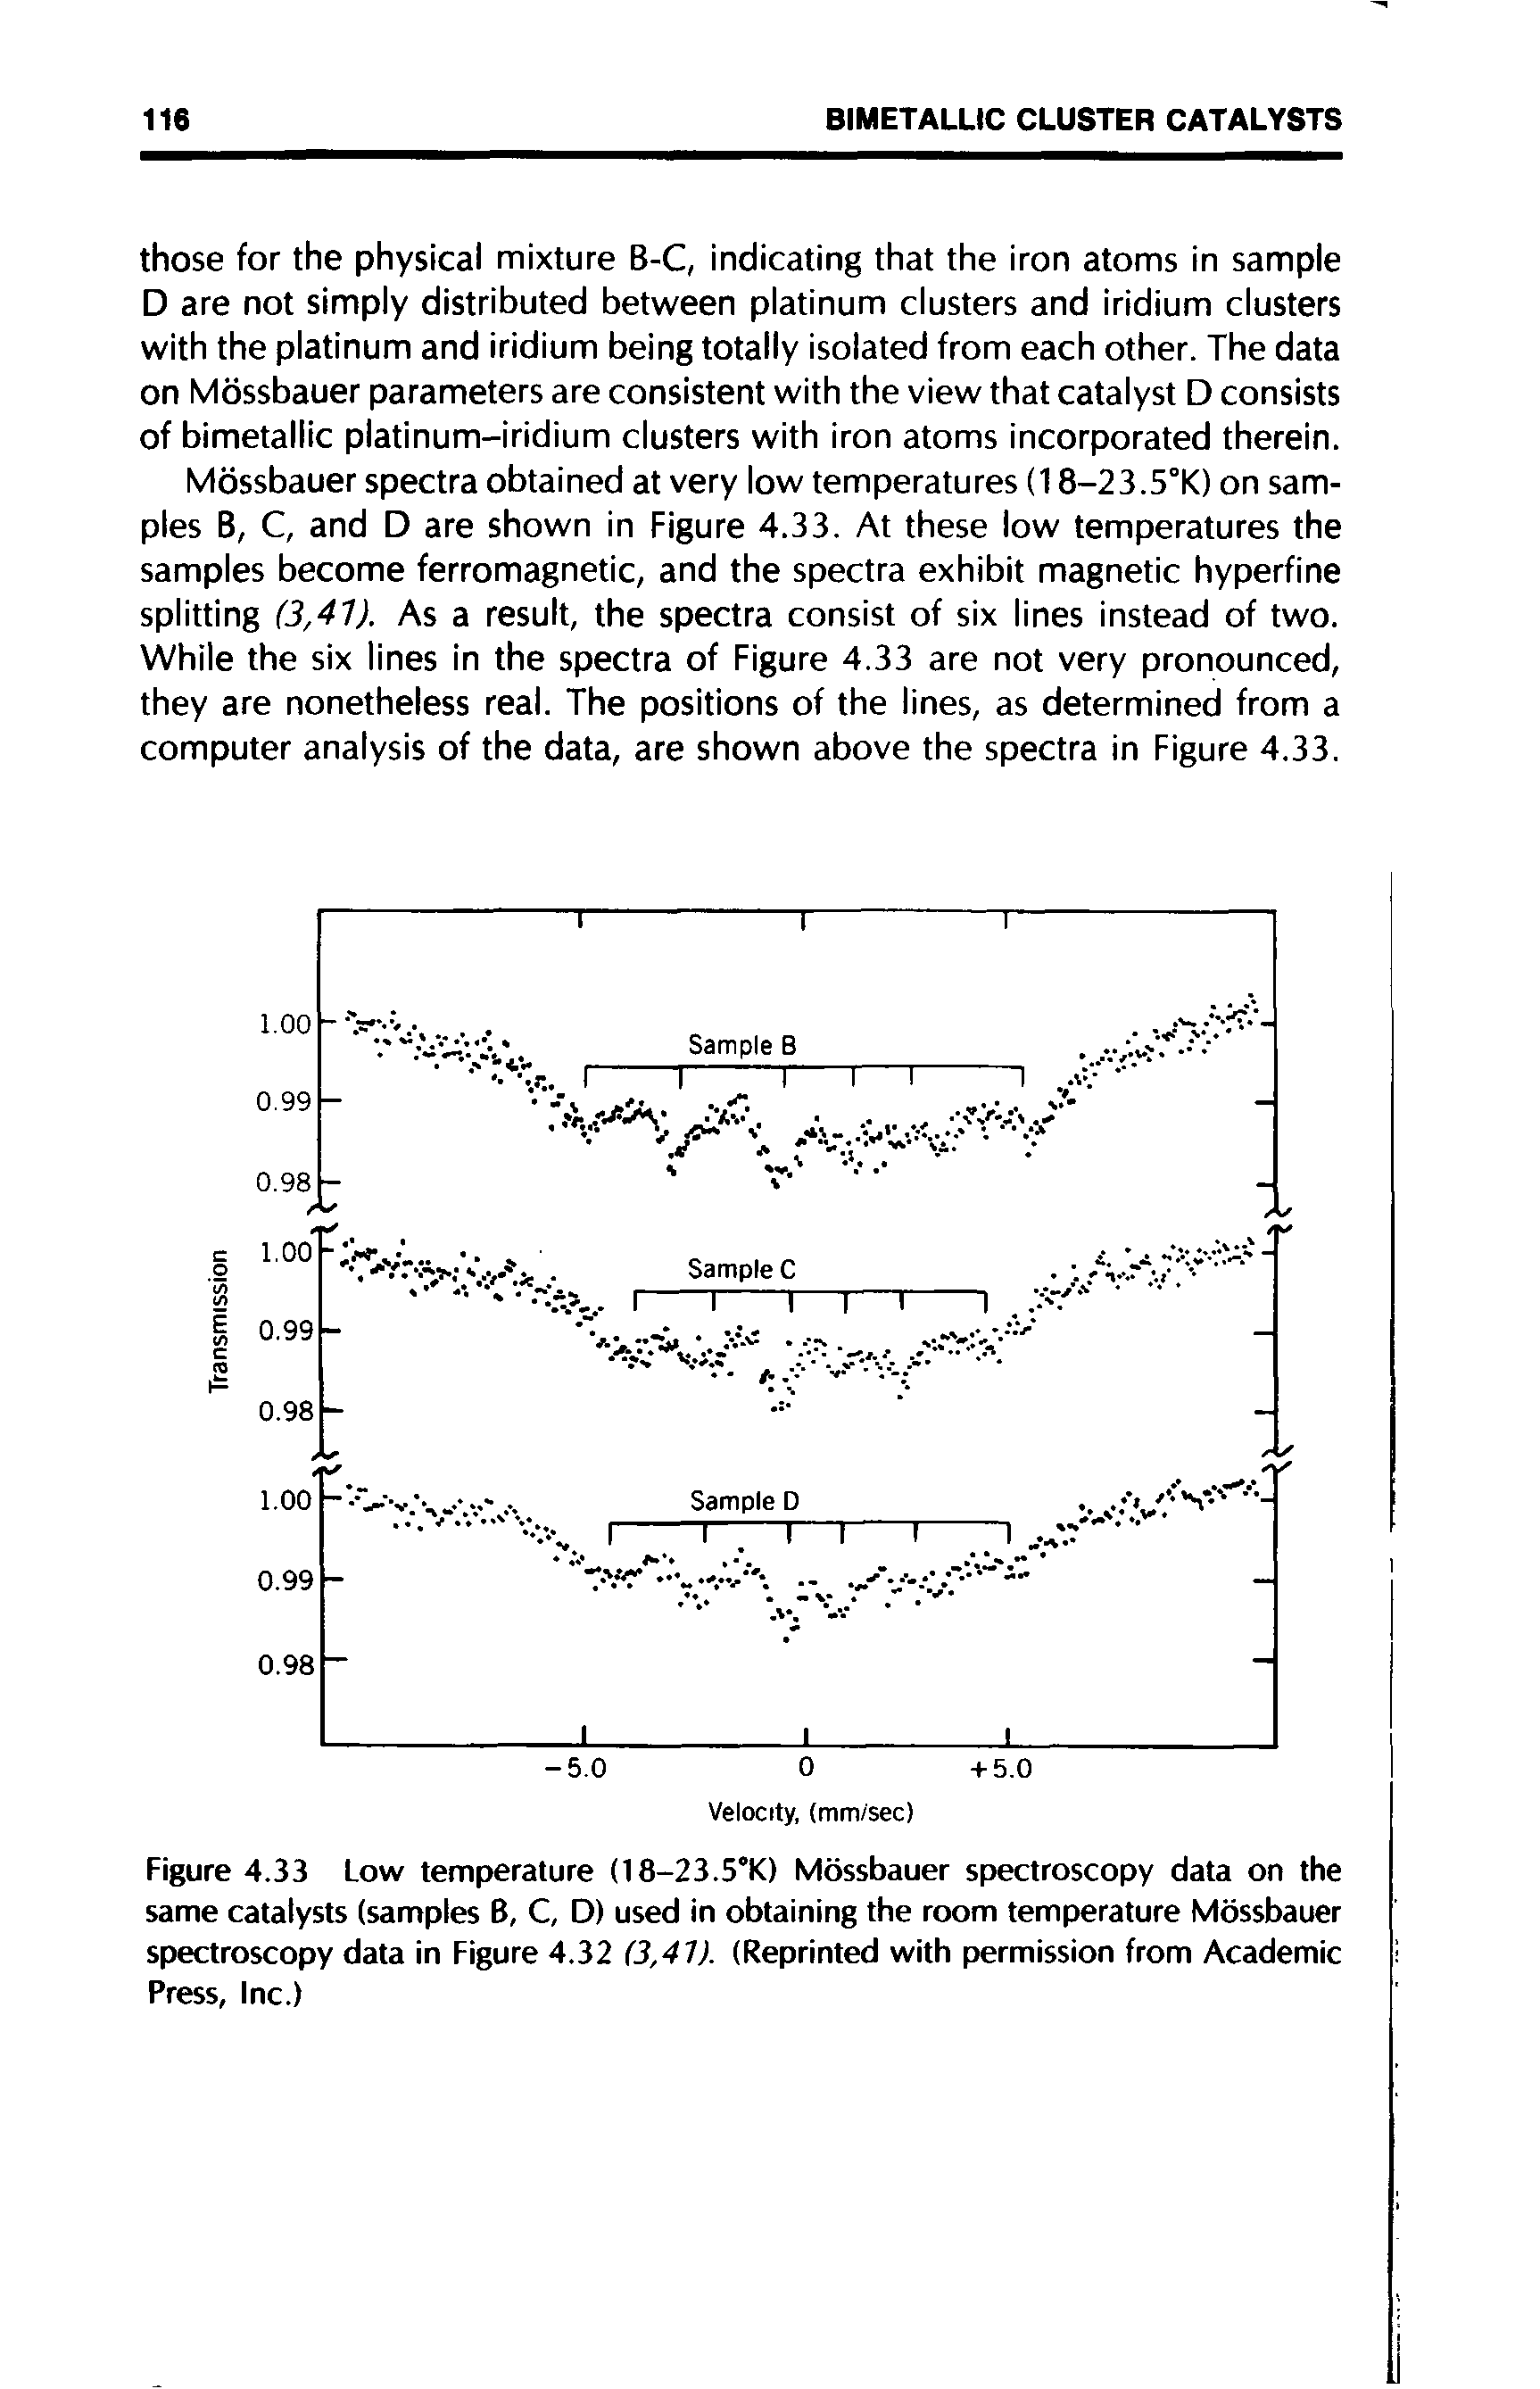 Figure 4.33 Low temperature (18-23.5°K) Mossbauer spectroscopy data on the same catalysts (samples B, C, D) used in obtaining the room temperature Mossbauer spectroscopy data in Figure 4.32 (3,41). (Reprinted with permission from Academic Press, Inc.)...